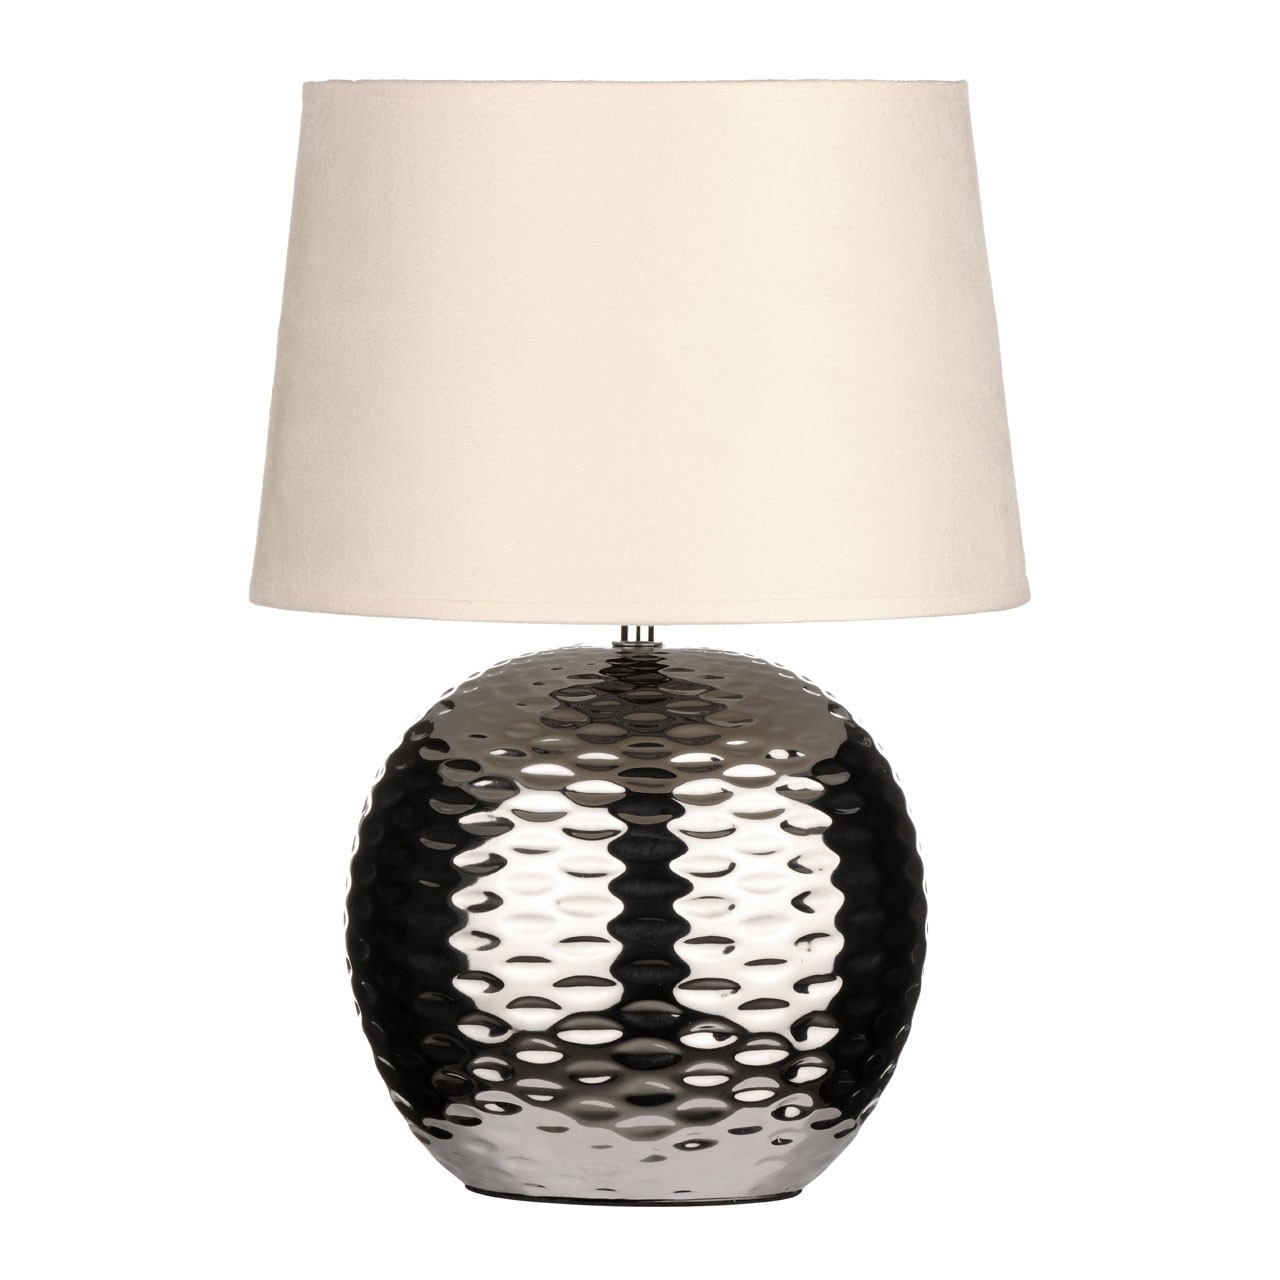 Prime Furnishing Dimple Effect Table Lamp, Fabric Shade - Beige